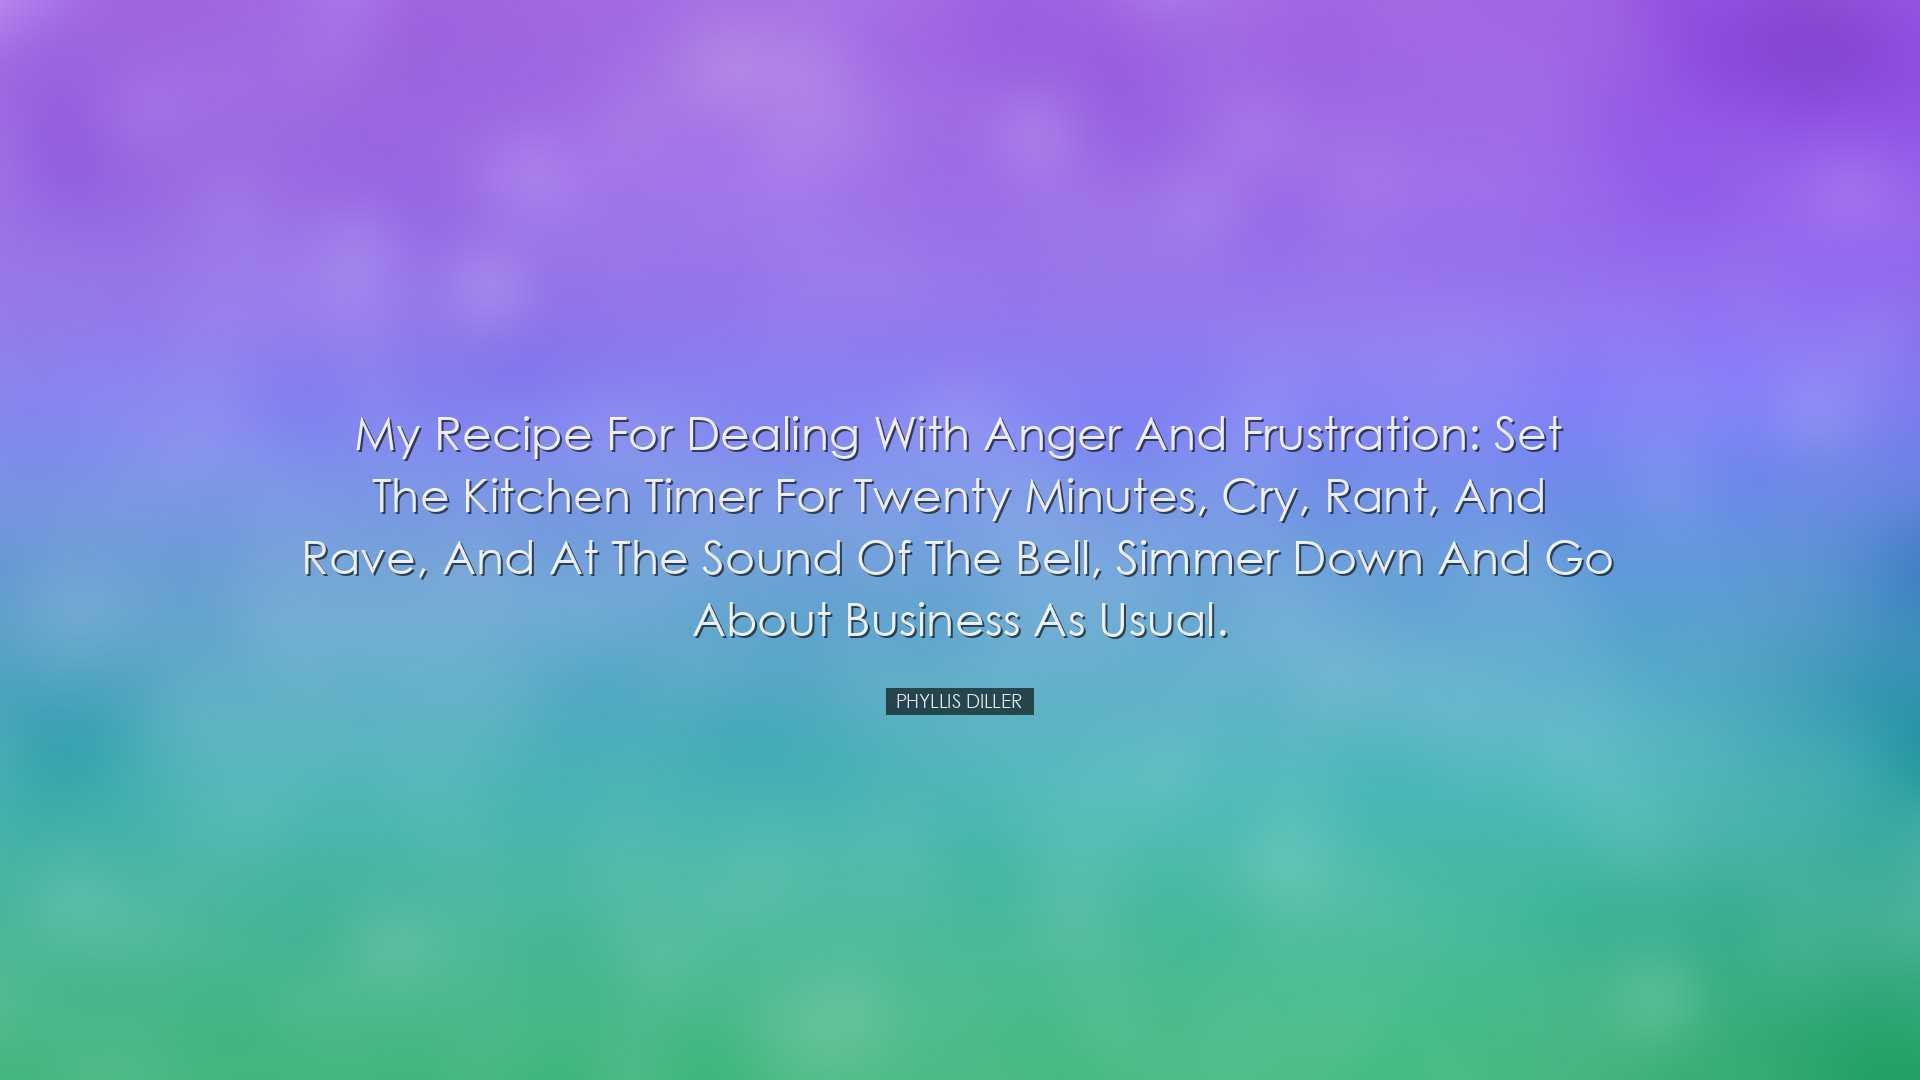 My recipe for dealing with anger and frustration: set the kitchen